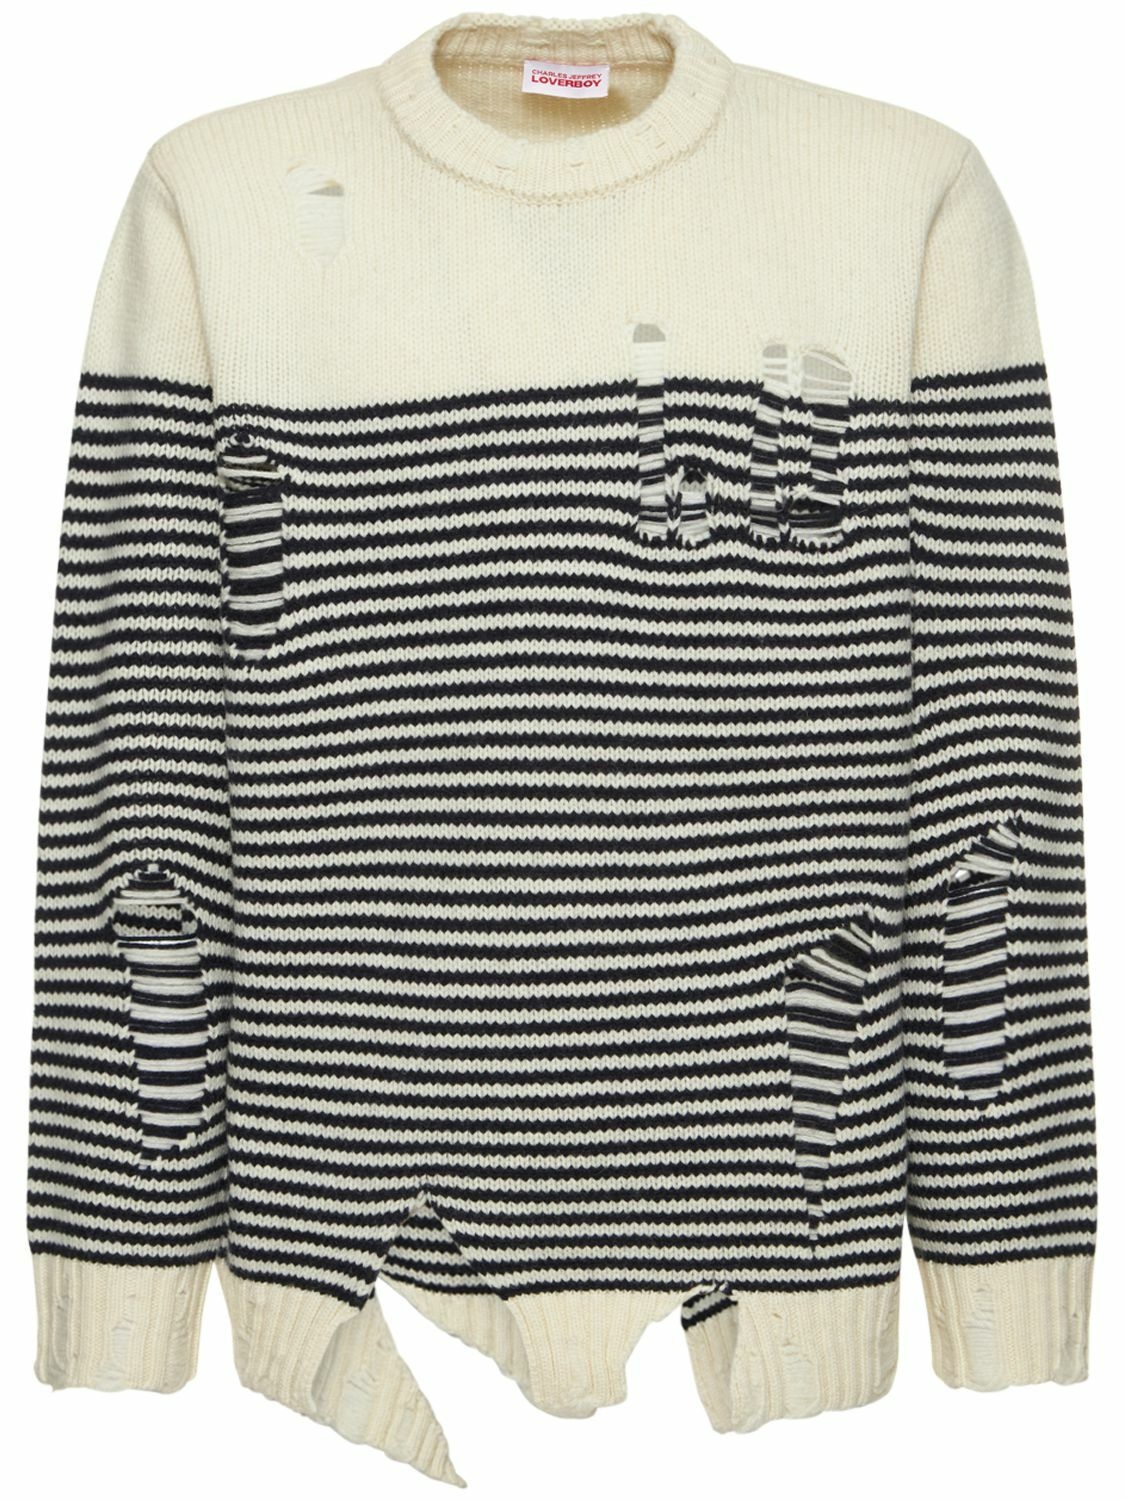 Photo: CHARLES JEFFREY LOVERBOY - Distressed Wool & Recycled Poly Sweater